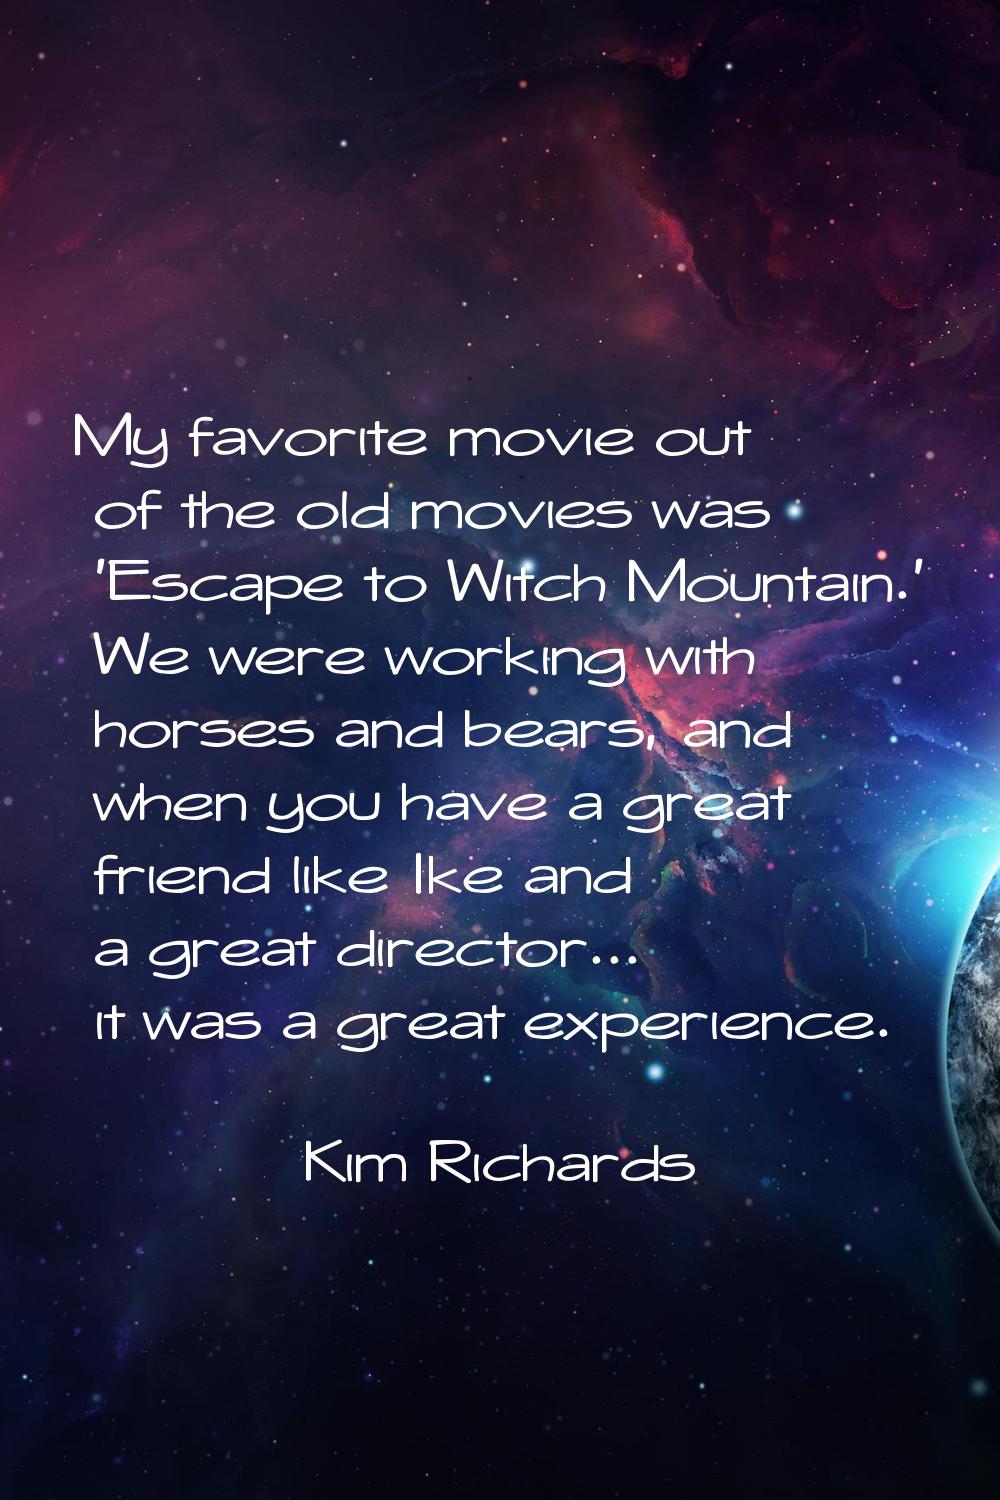 My favorite movie out of the old movies was 'Escape to Witch Mountain.' We were working with horses